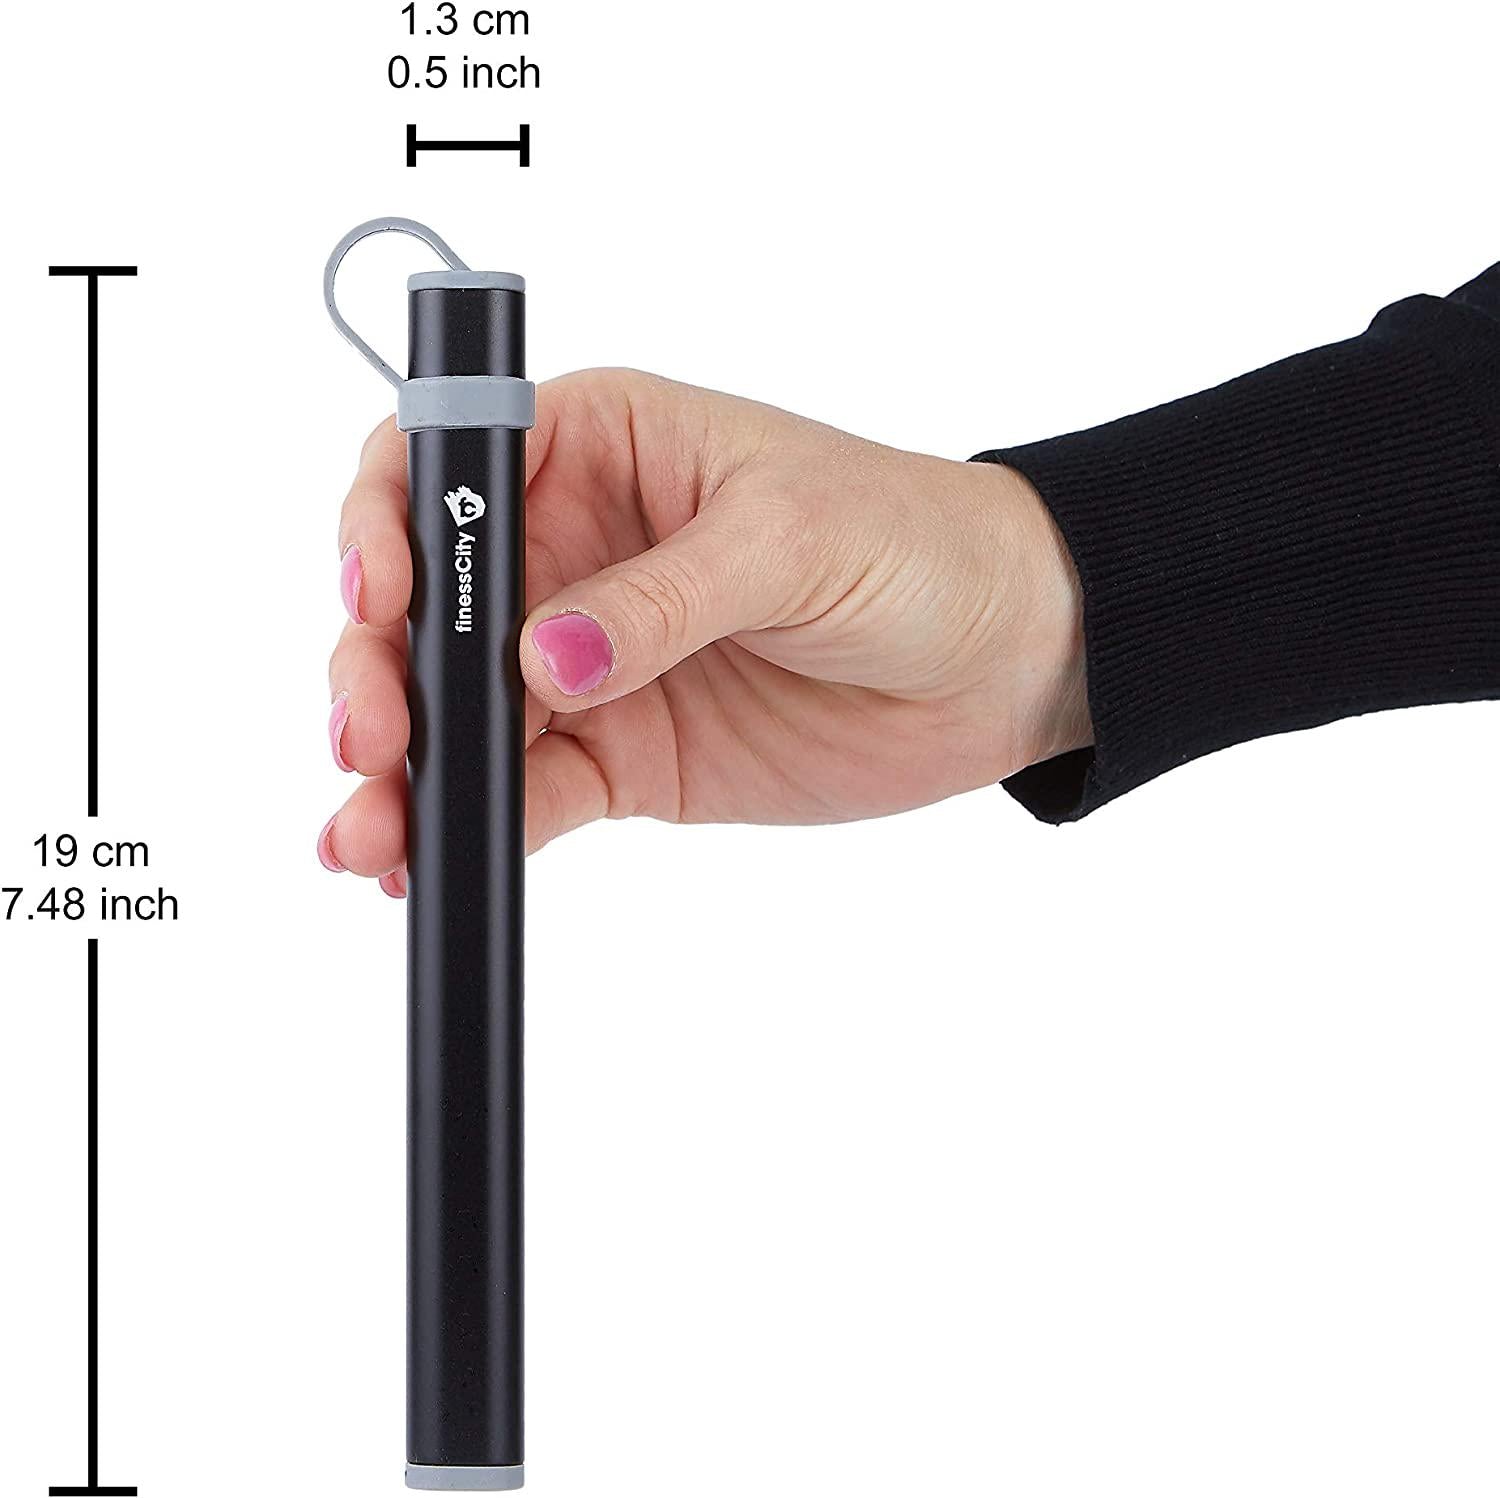 finessCity, Kids Chopstick with Training Holders, Travel Chopsticks 6.7 /171mm Long, Lightweight and Strong Pure Titanium Chopsticks Comes Beautiful Aluminium Cases and Holders (Black)